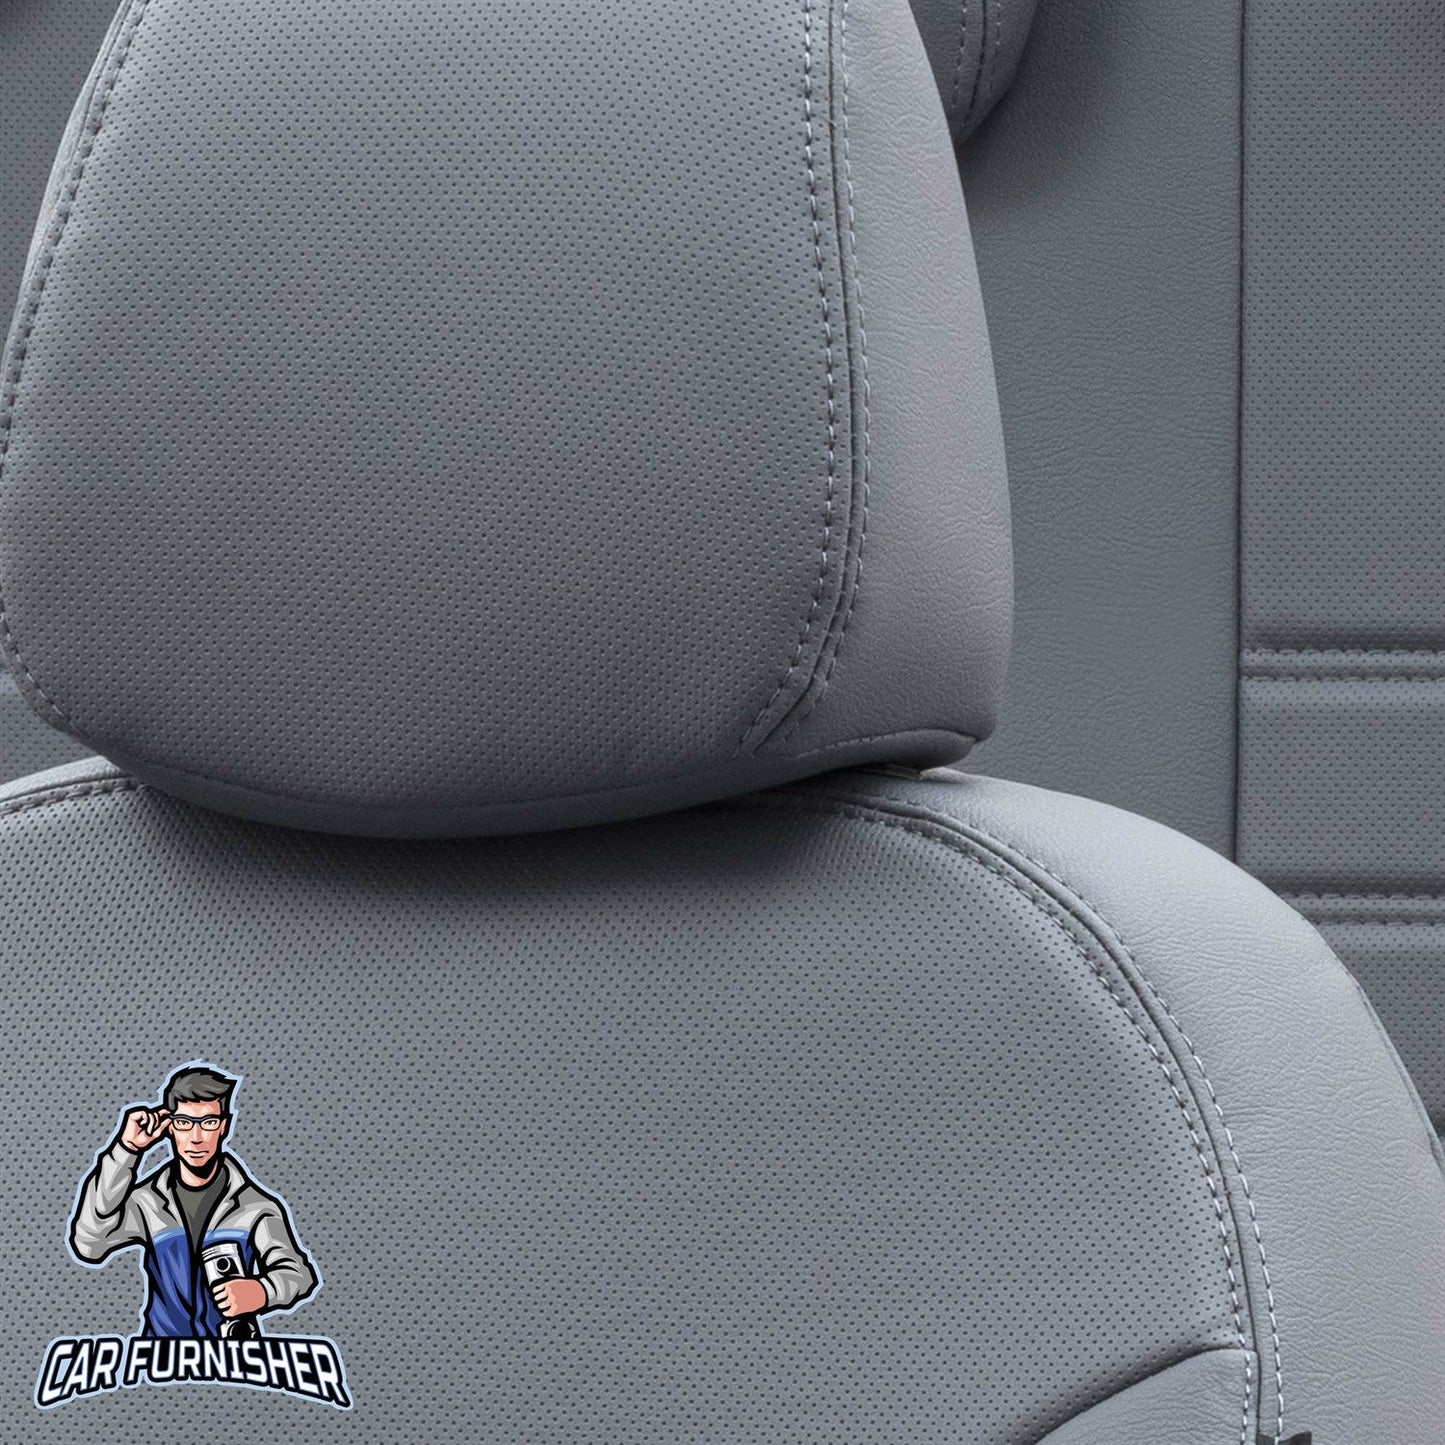 Volkswagen Tiguan Seat Cover Istanbul Leather Design Smoked Leather